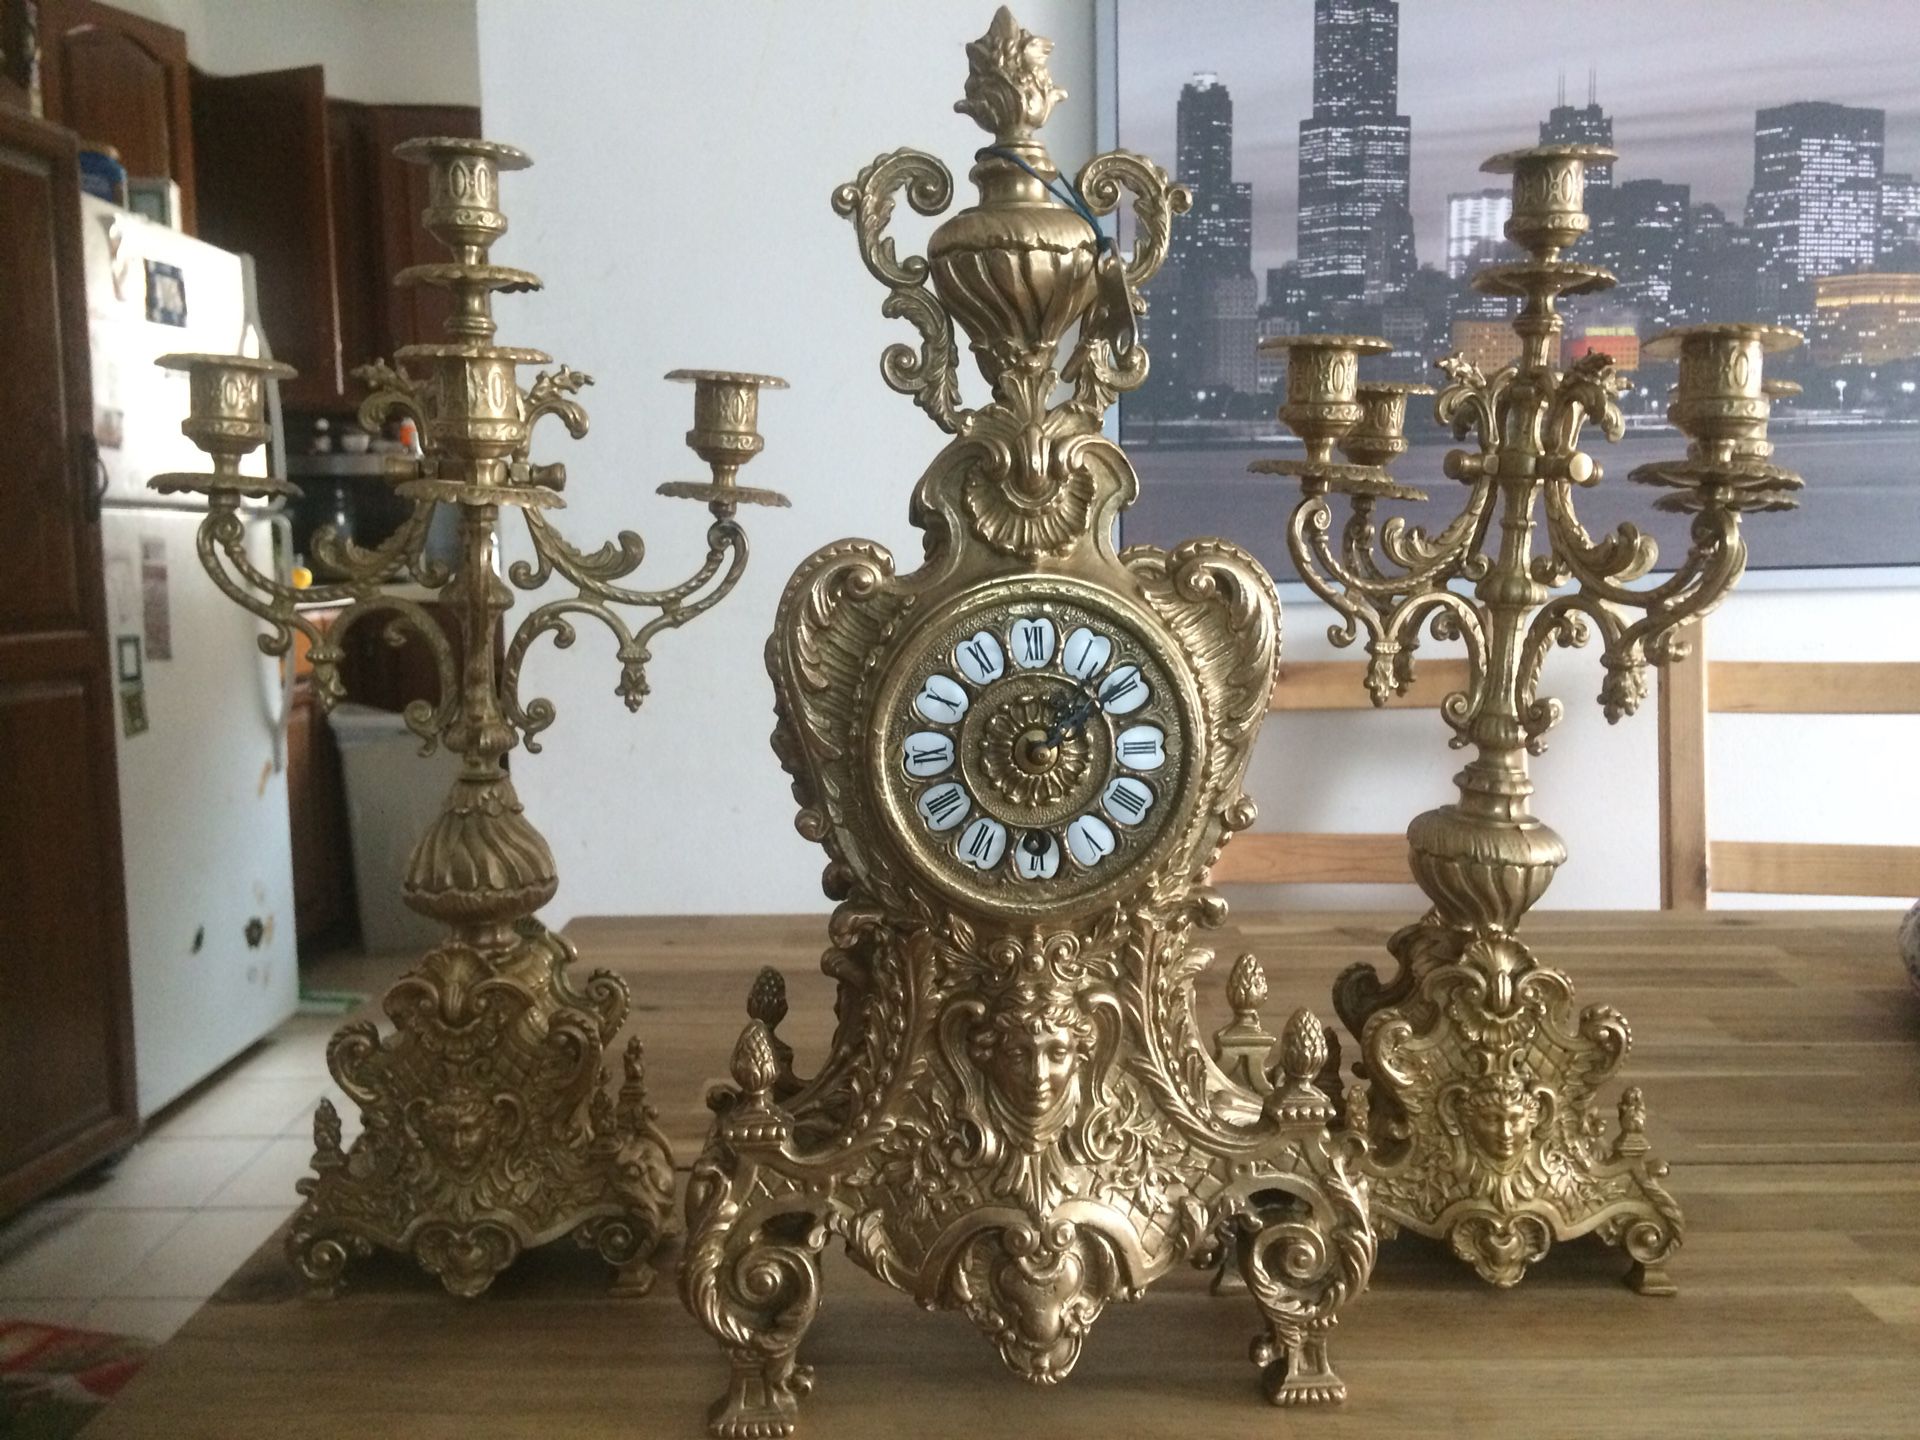 French heavy clock with 2 candelabras runs